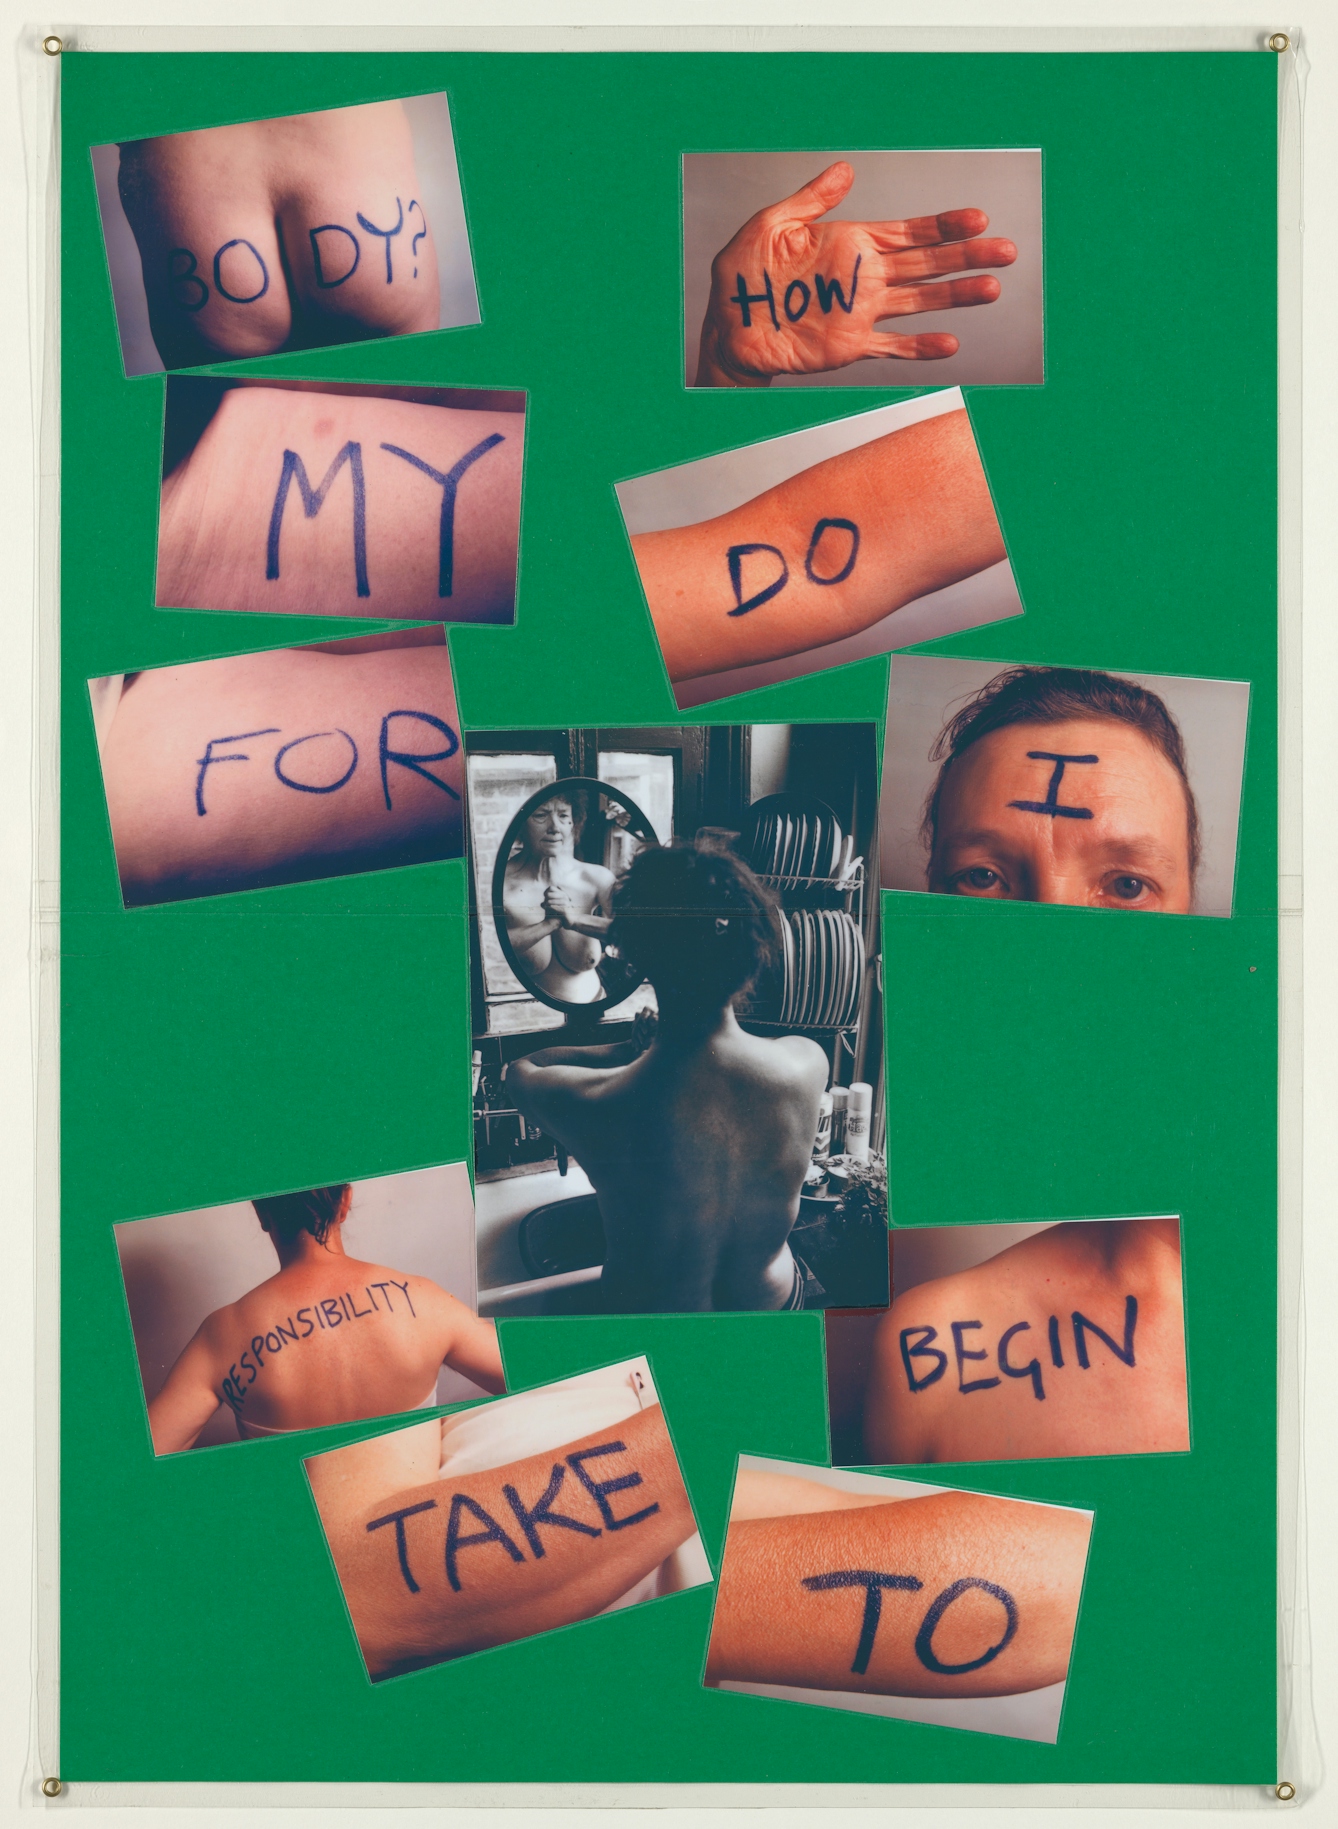 Photograph of a green sheet of paper with 10 colour photographs and 1 black and white photograph mounted on top. The central black and white image shows a woman naked from the waist sitting in front of a mirror, pressing her hands together. The other 10 photographs show various body parts of the same woman with a word written on each. All together the words read, "How do I begin to take responsibility for my body?". The whole collage is laminated.